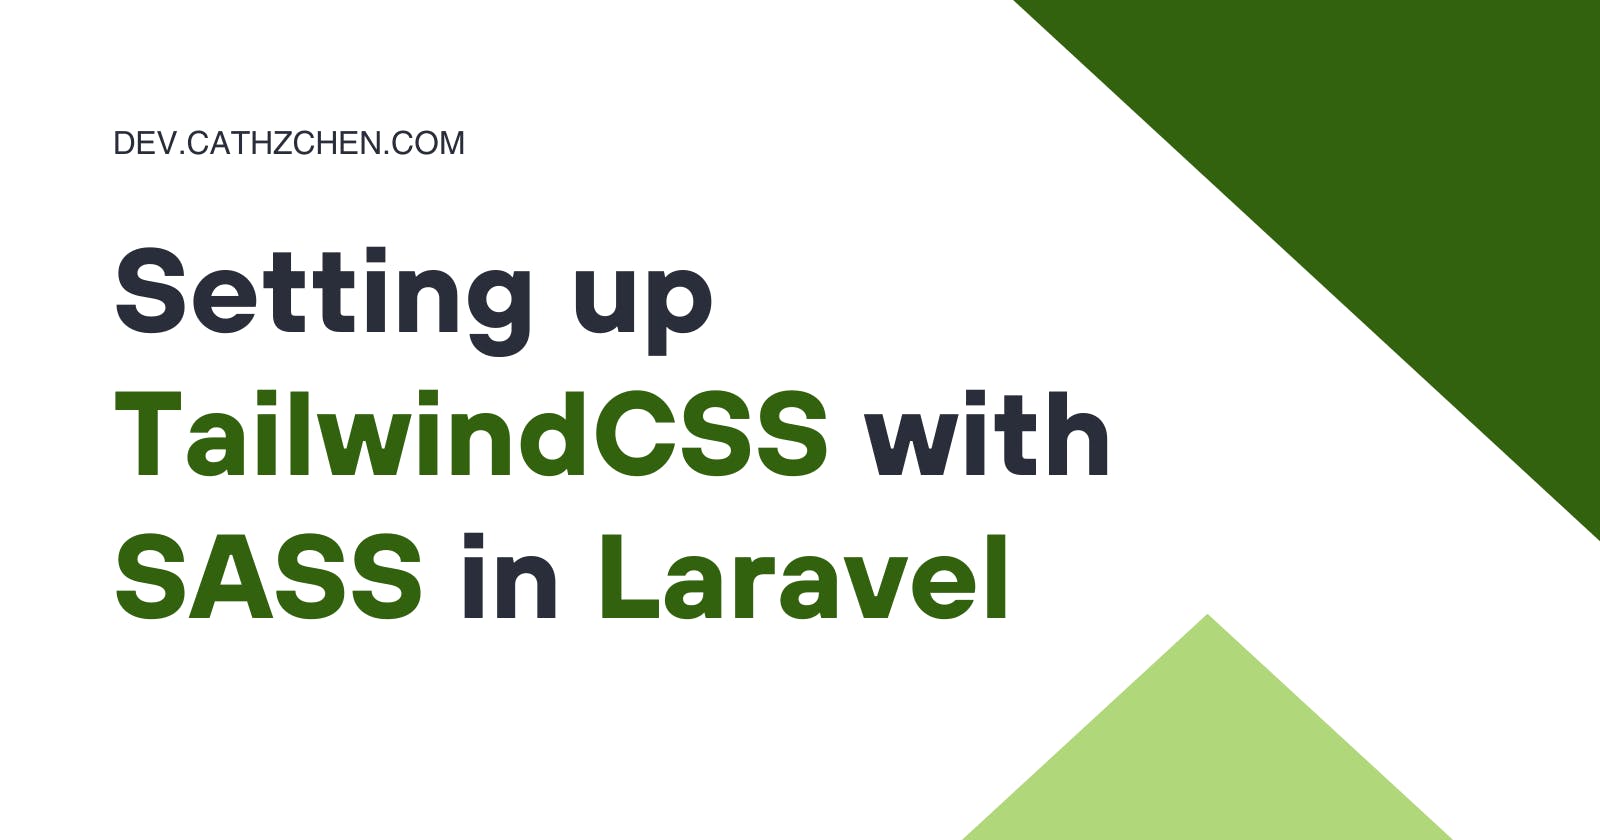 Setting up TailwindCSS with SASS in Laravel